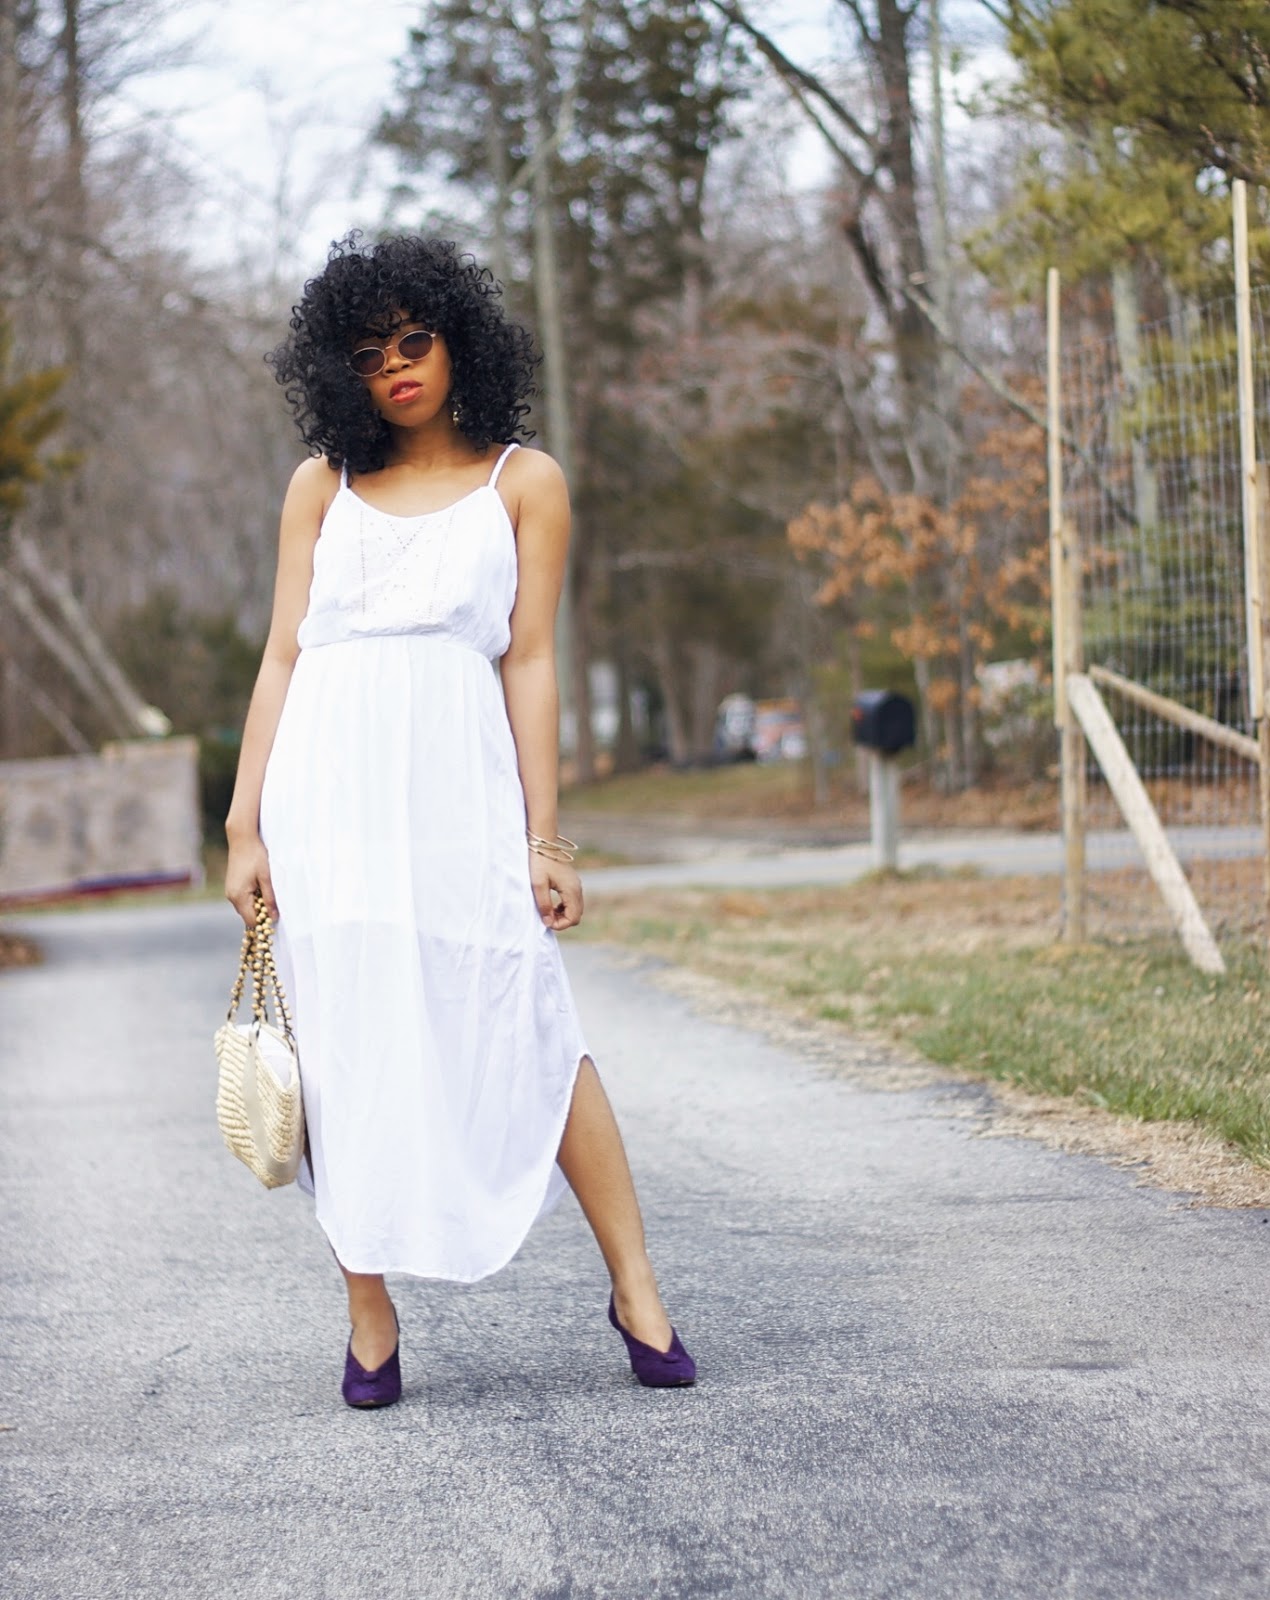 HOW TO STYLE A WHITE DRESS FOR SPRING